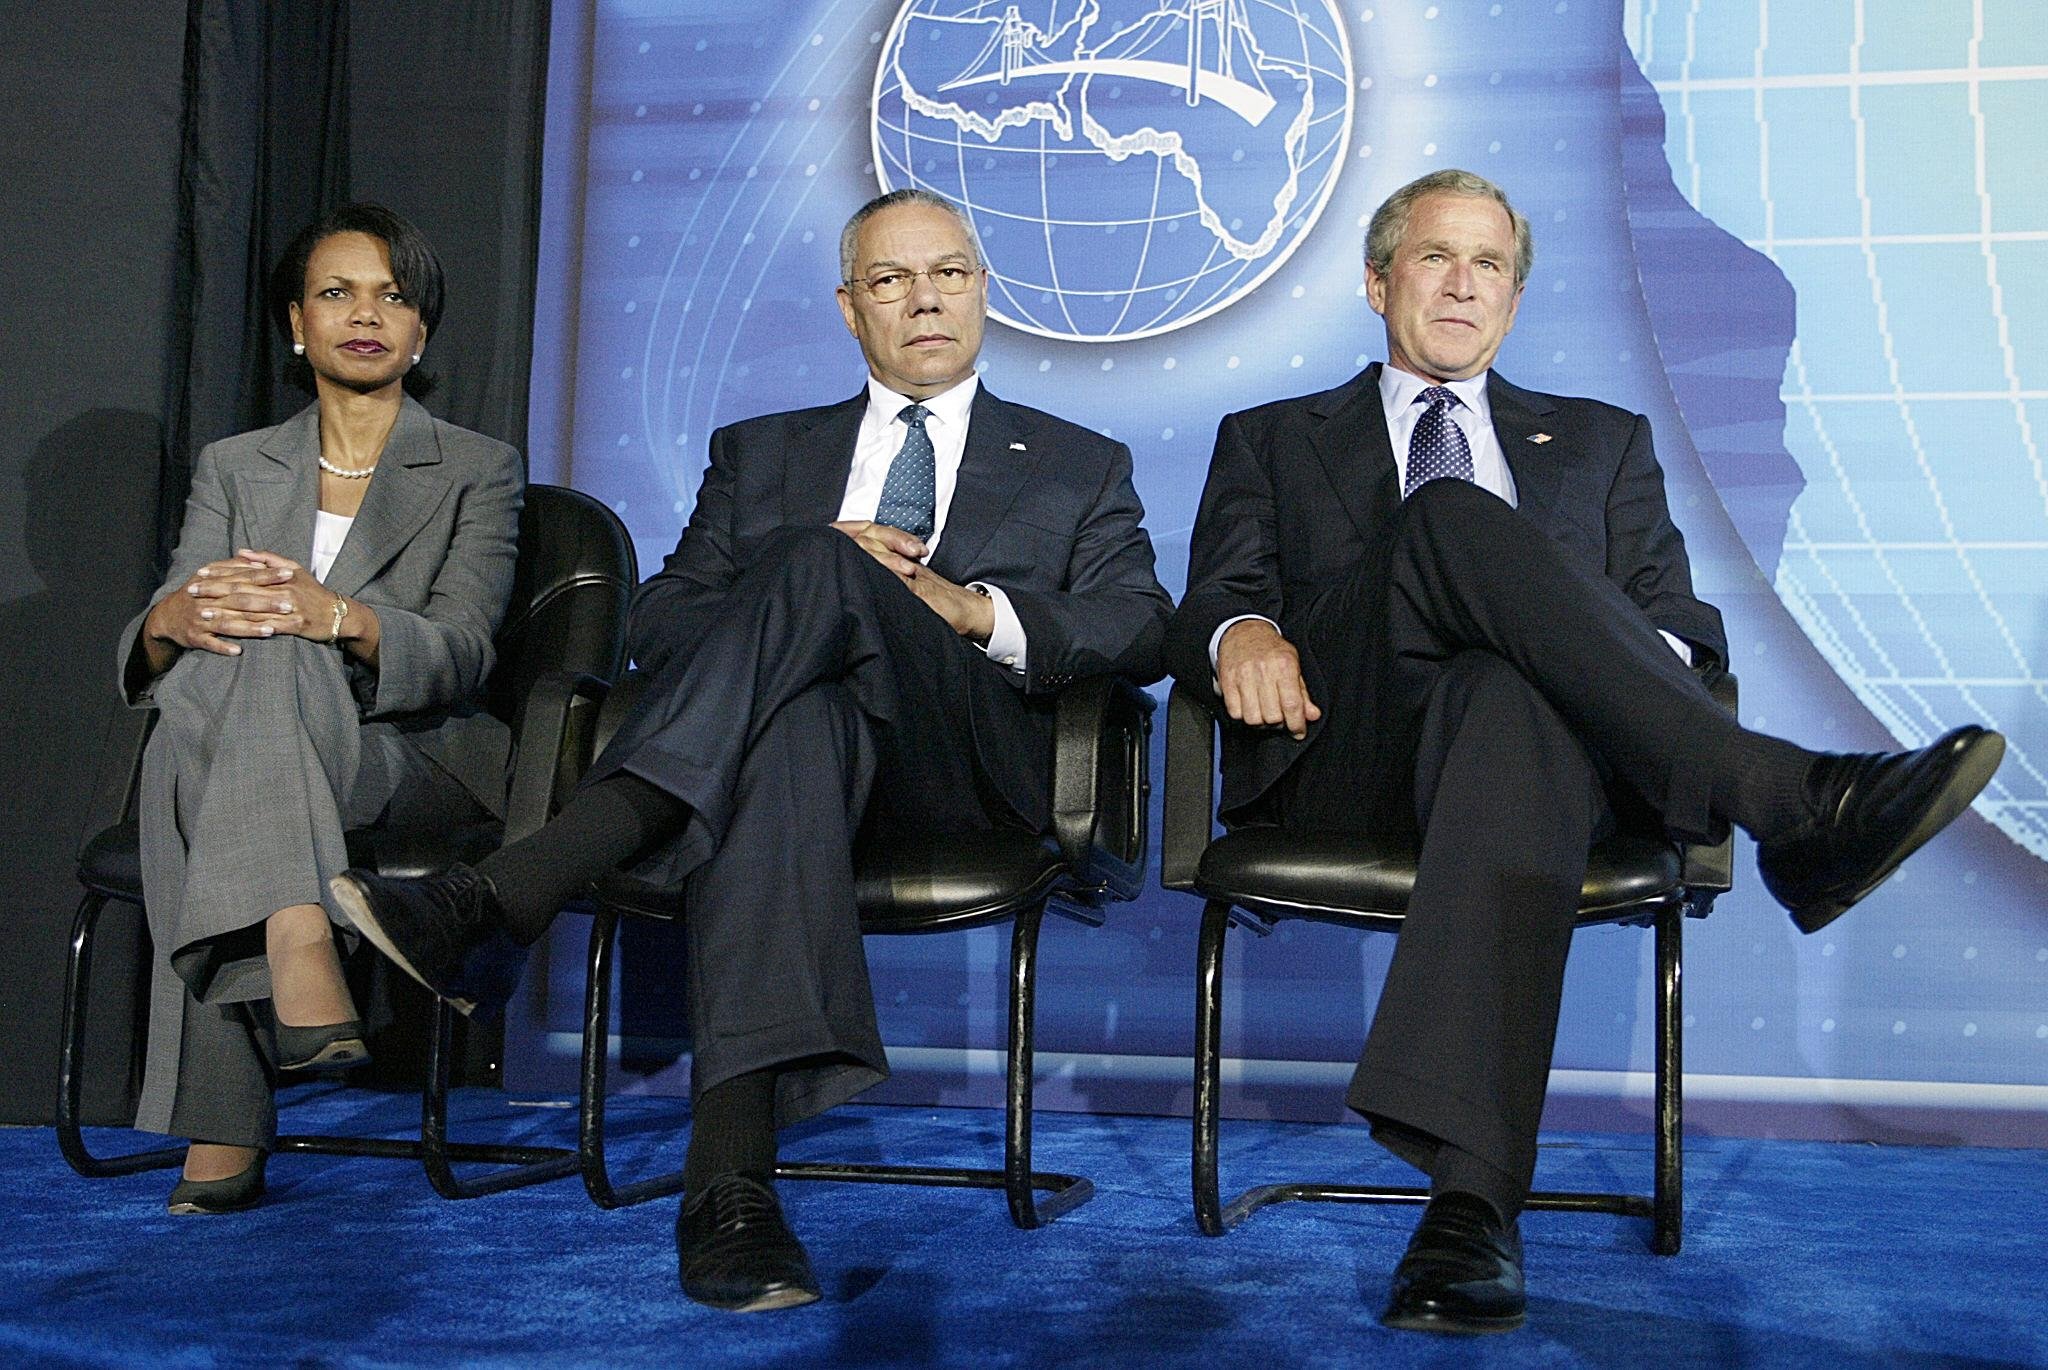 In this file photo taken on July 12, 2003, former US President George W. Bush (R), his National Security Advisor Condoleezza Rice (L), and former US Secretary of State Colin Powell (C) attend the Leon H. Sullivan Summit, at Congress Hall in Abuja, Nigeria. (AFP Photo)